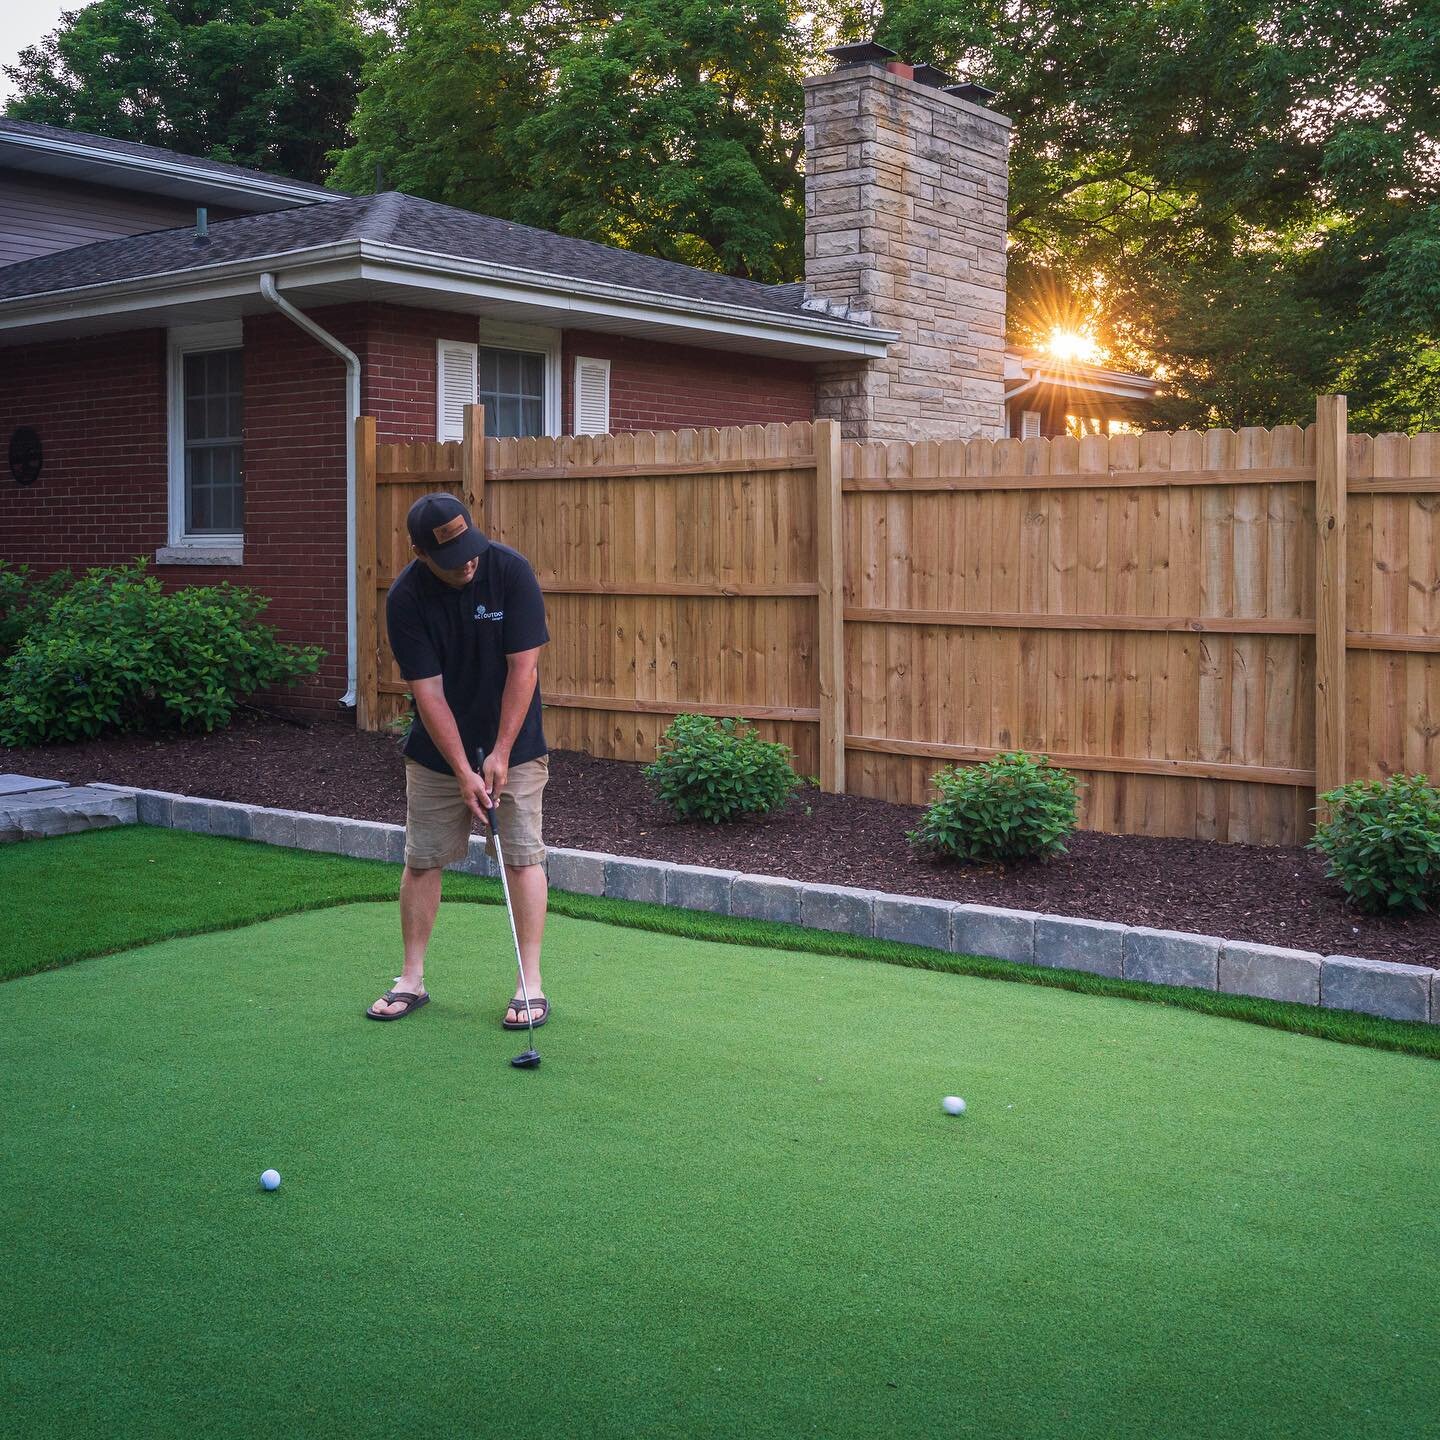 Every outdoor living space should have a putting green! Even if you don&rsquo;t play golf. If it&rsquo;s one thing I&rsquo;ve learned from having one at my house this year, it makes it such an interactive space for everyone, even the kids. A patio is